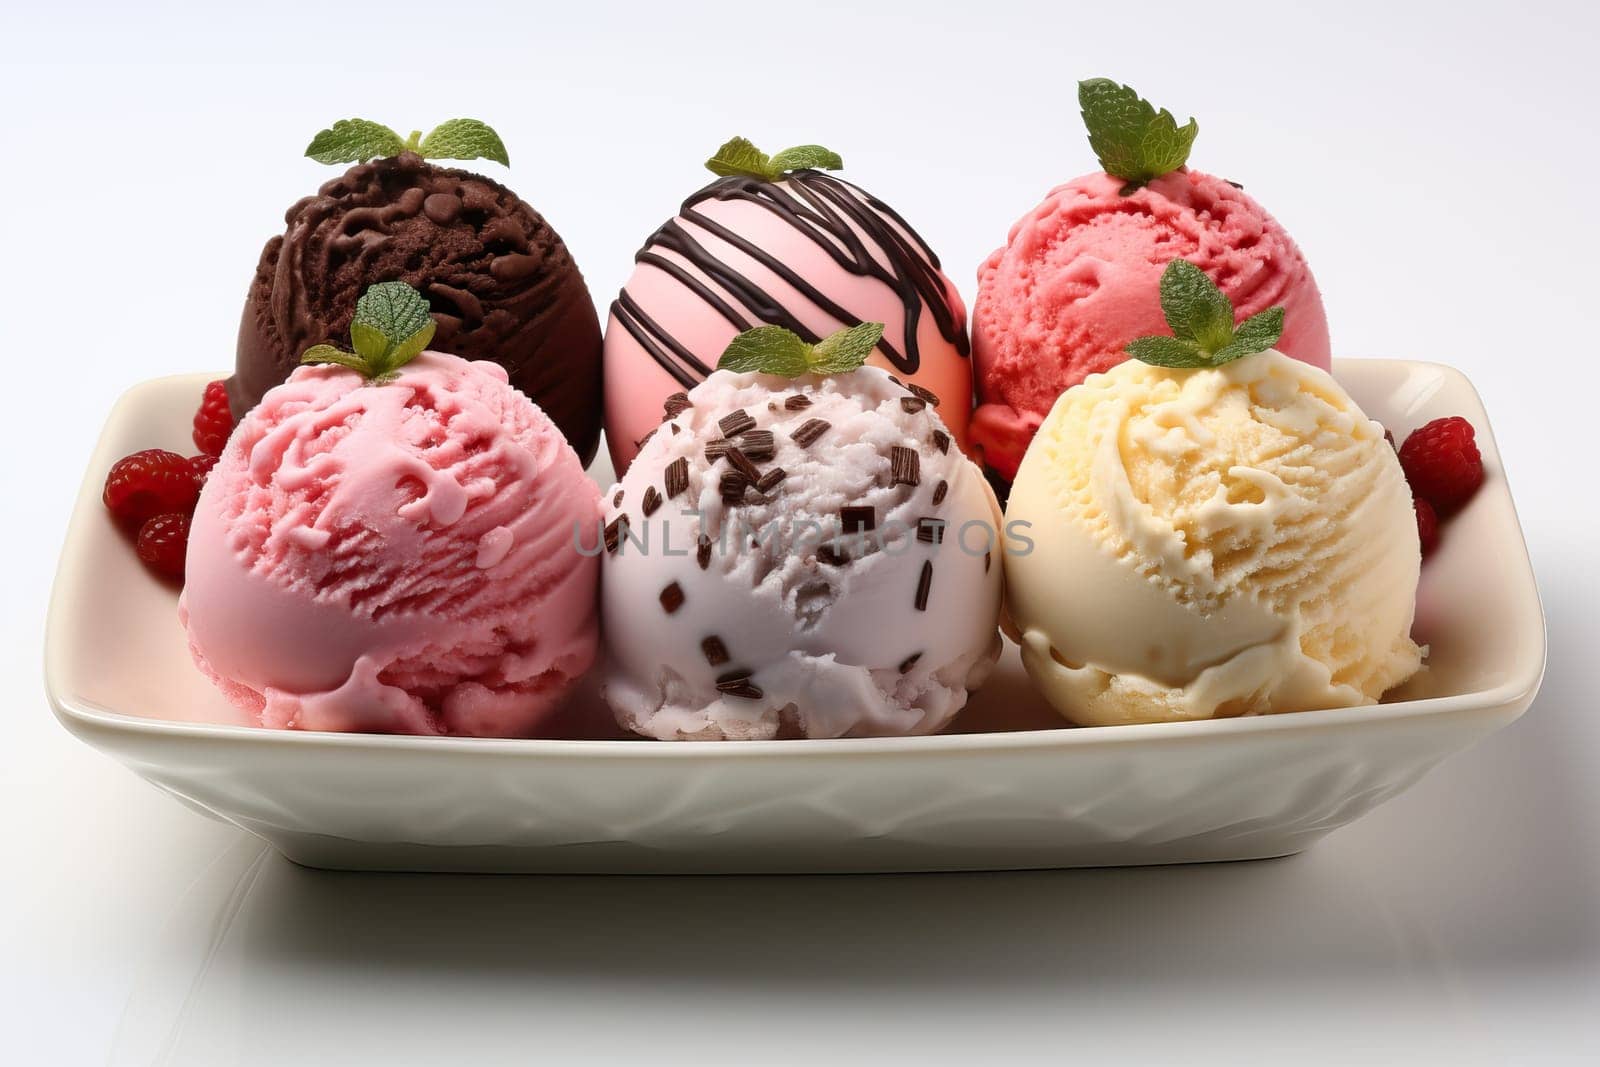 Scoops of vanilla, strawberry and chocolate ice cream in an ice cream bowl or ice cream in an ice cream bowl. Colored ice cream scoops on a plate